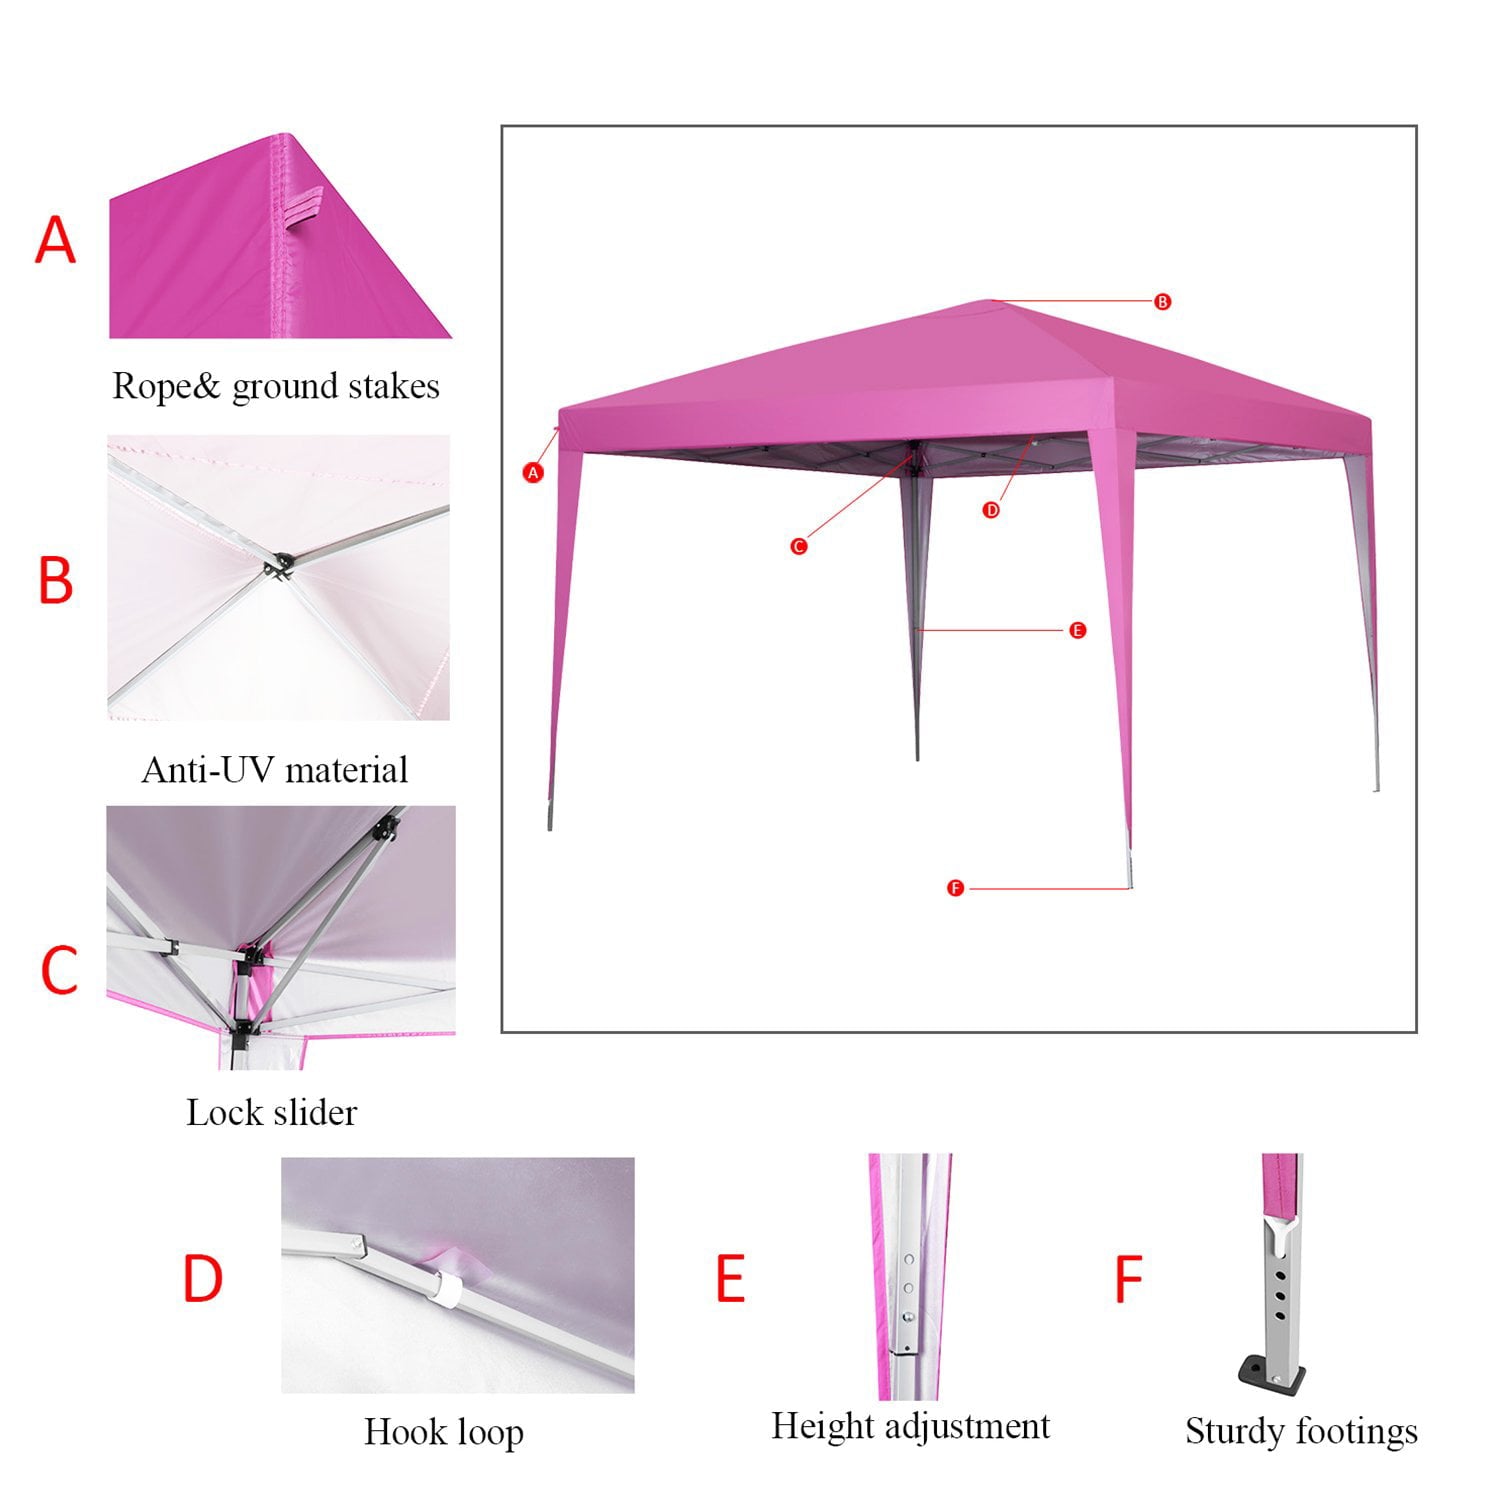 Wesfital 10x10 Ft Outdoor Pop Up Canopy Tent Instant Shelter Pop-Up Sun Camping Tent, Pink